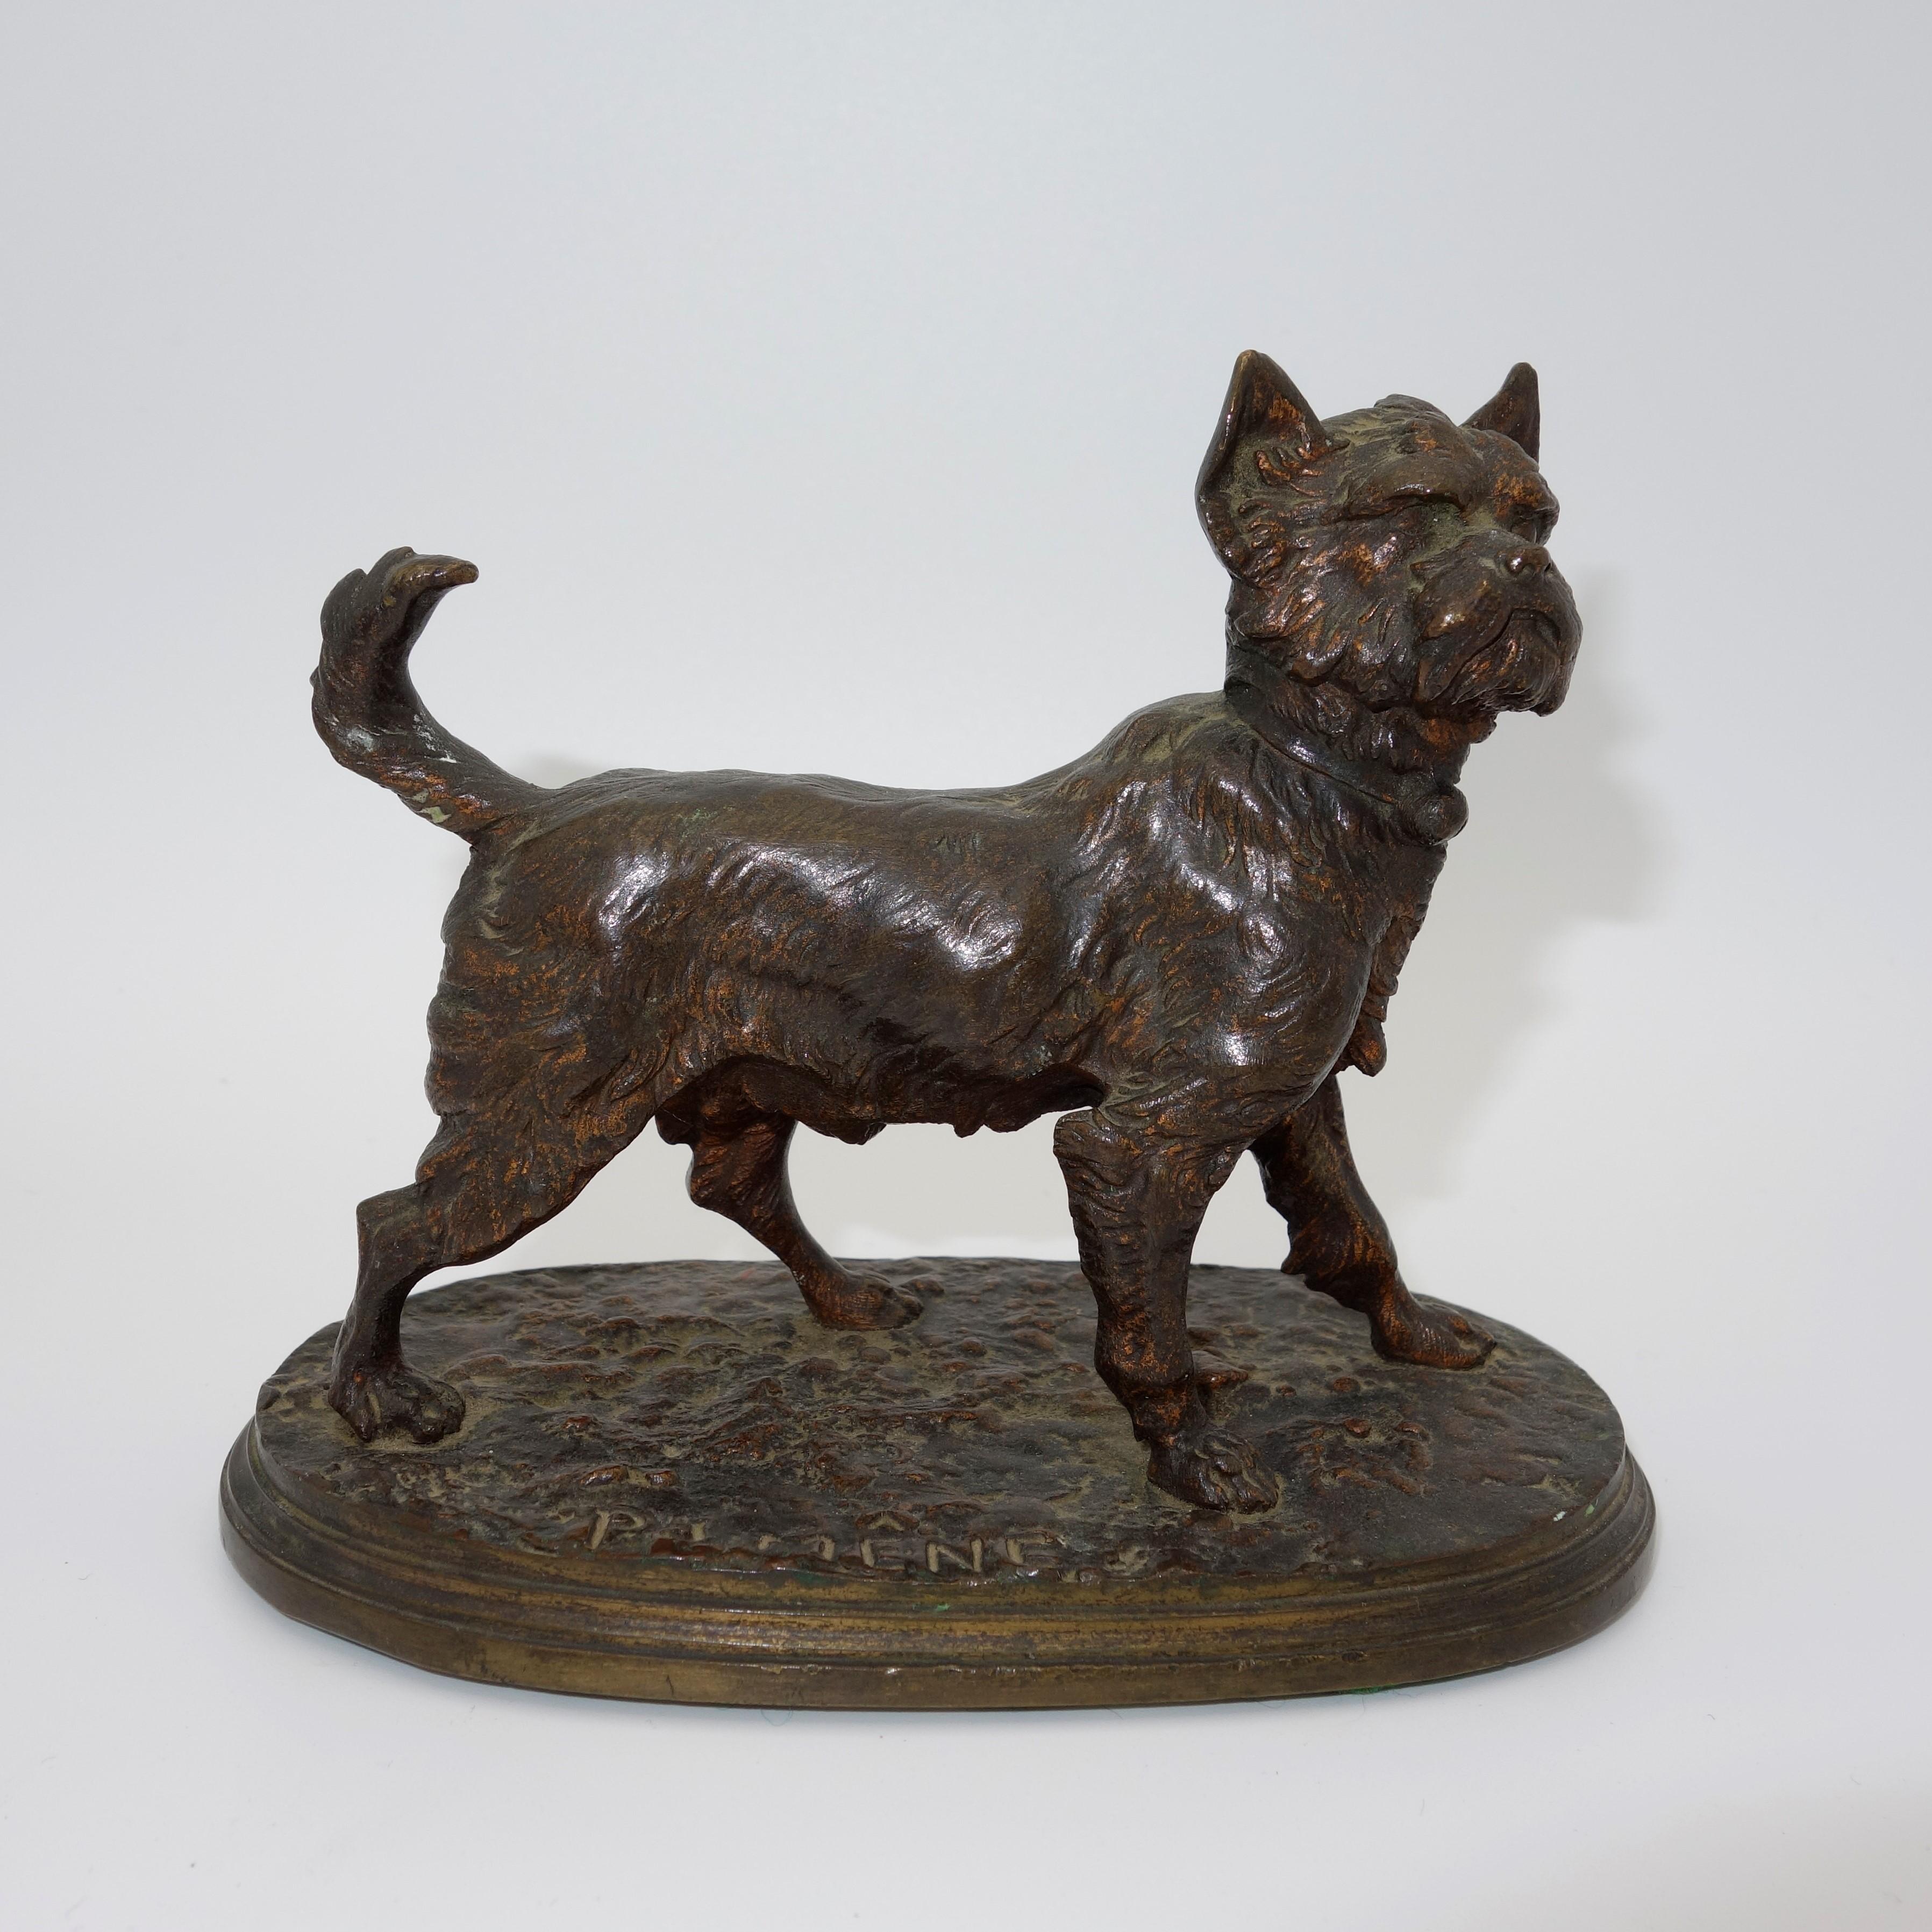 A French animalier bronze of a terrier signed P.J. Mêne.